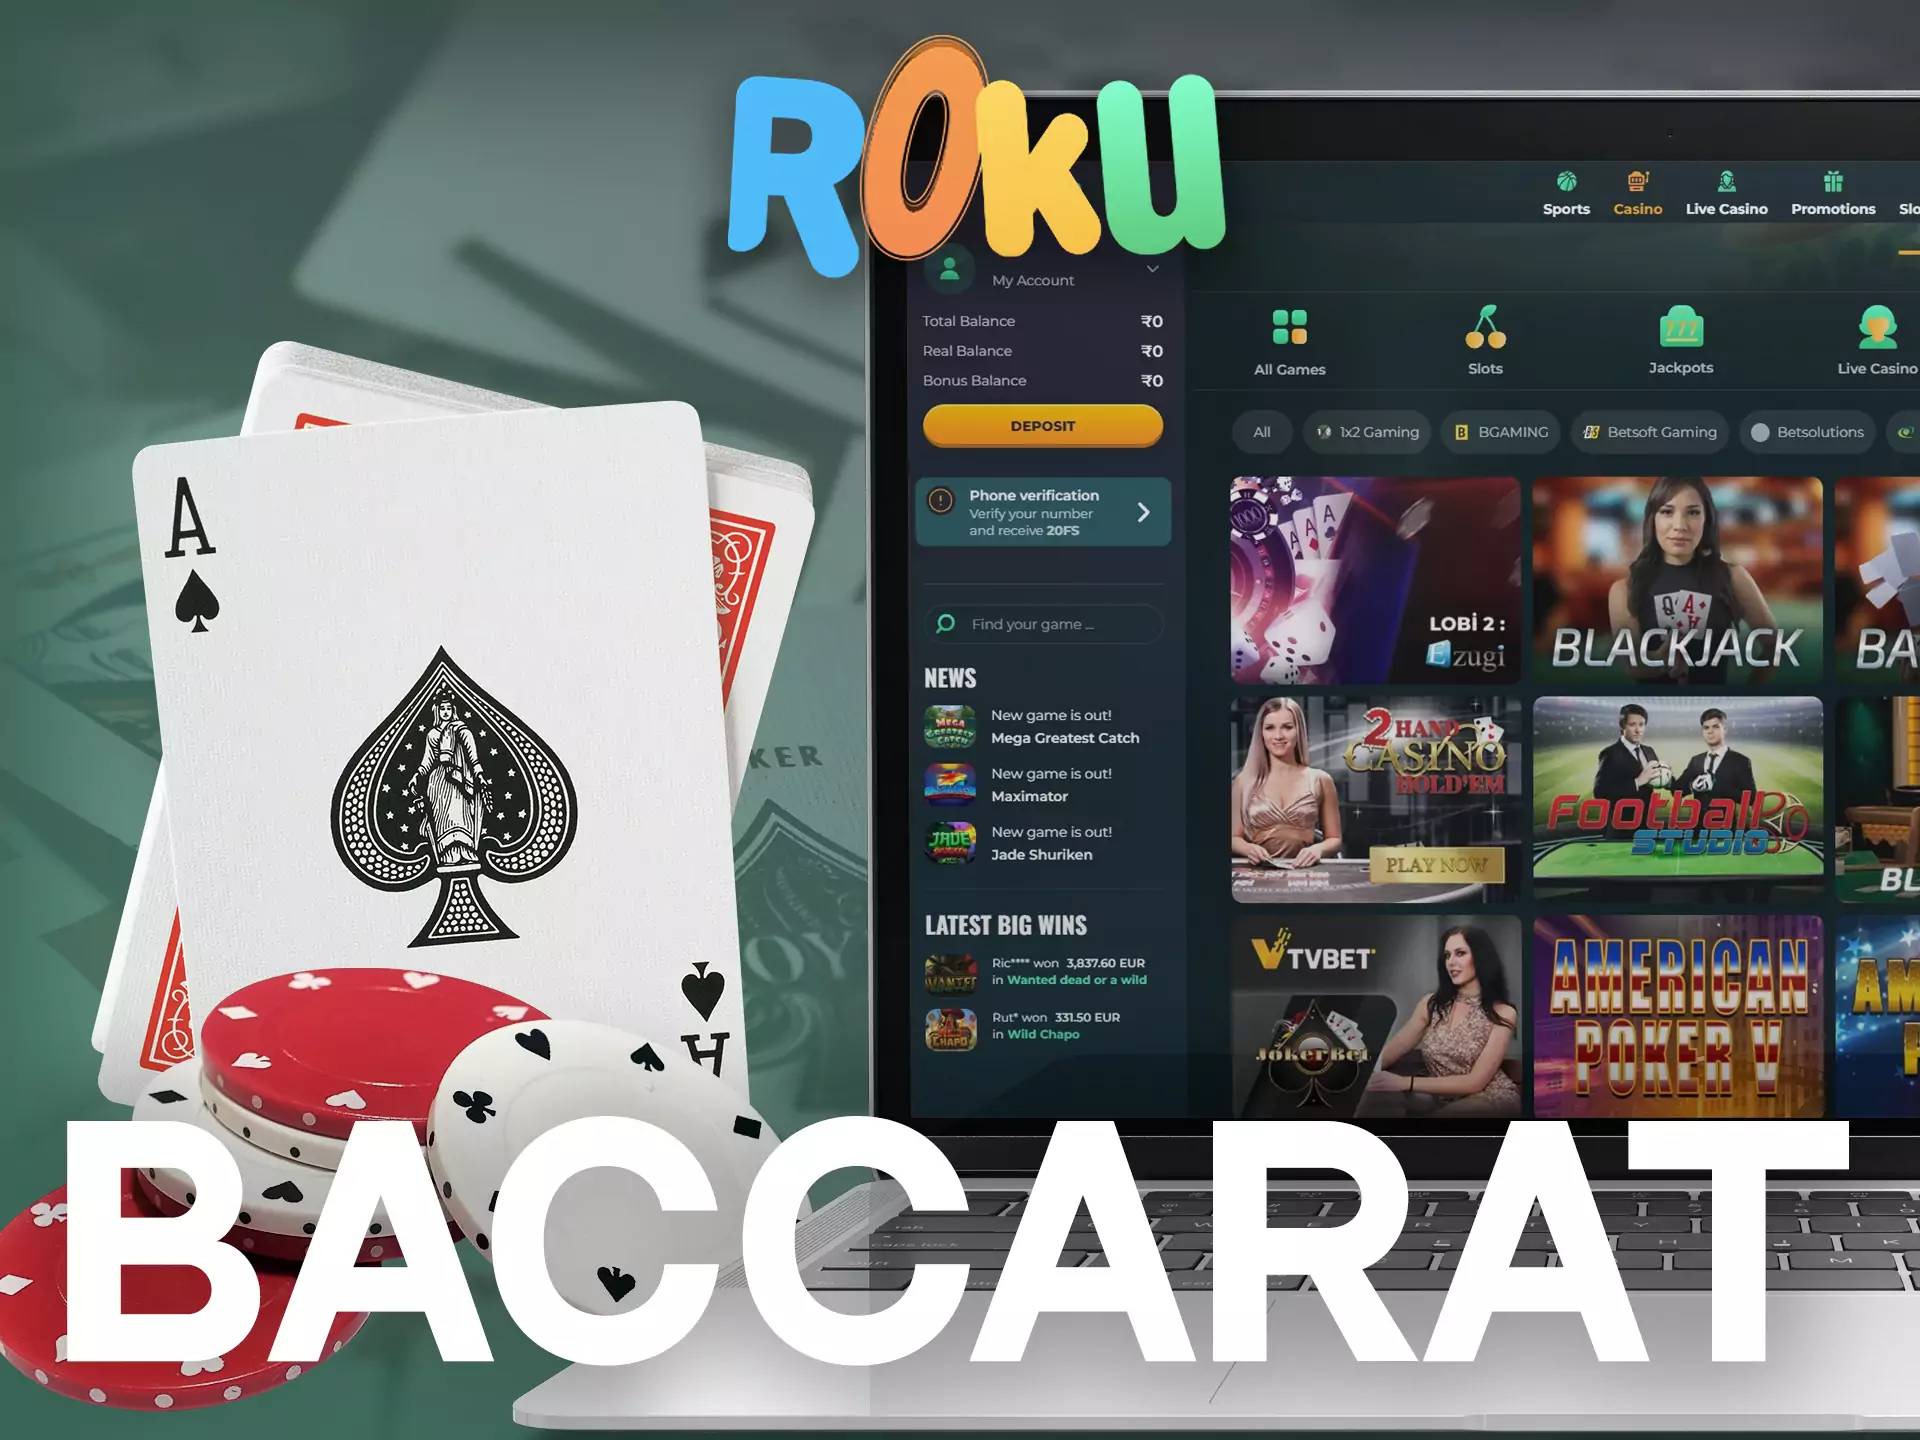 Baccarat is a traditional card game widely provided in the Rokubet online casino.